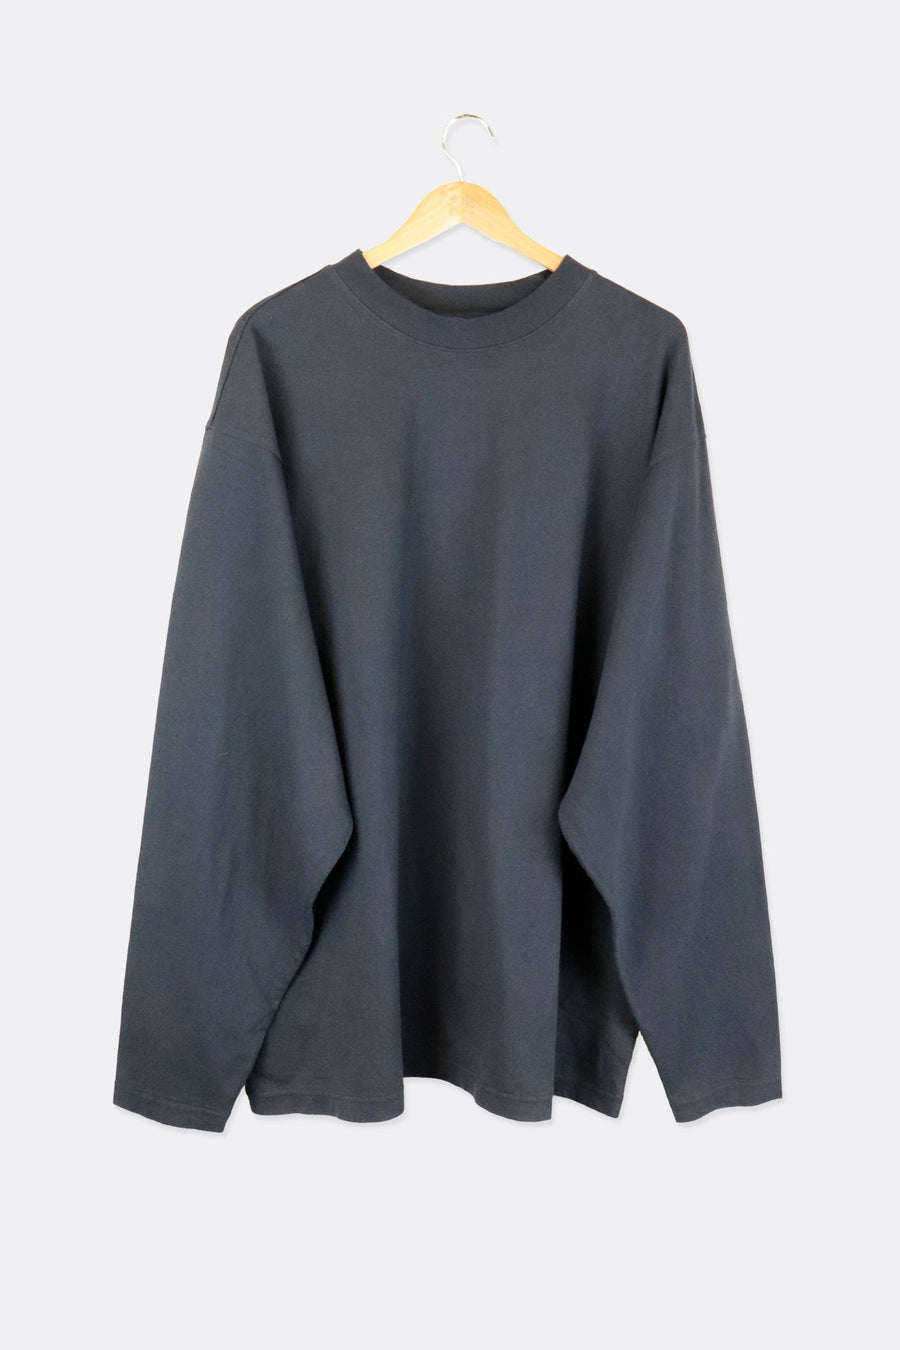 Re-Stock Yeezy X Gap Long Sleeve T-shirt Unreleased - All Sizes + All Colors